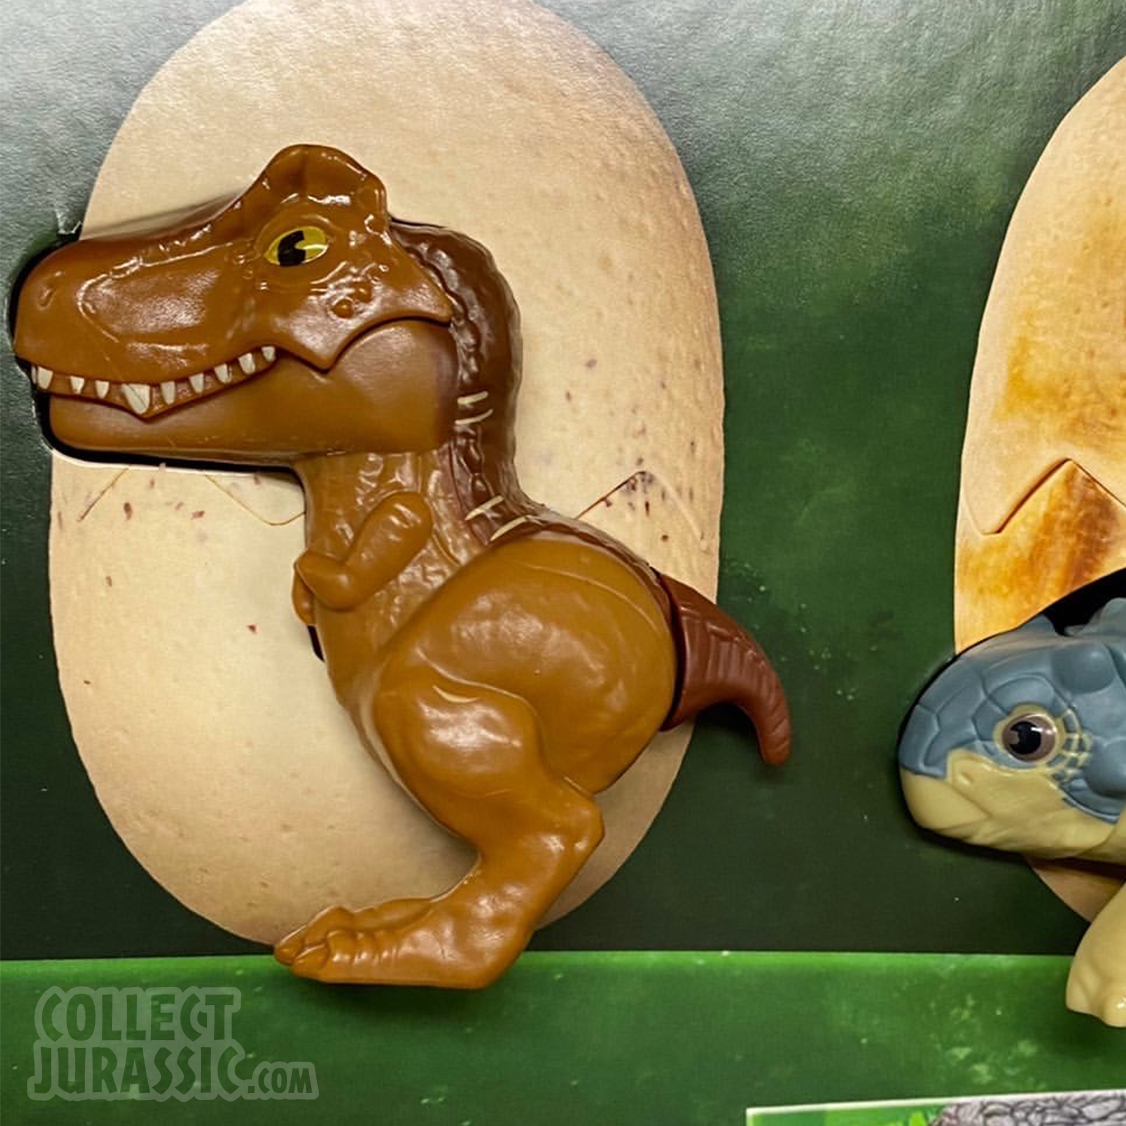 Mcdonald S Happy Meal Toys For Camp Cretaceous Coming In September Collect Jurassic